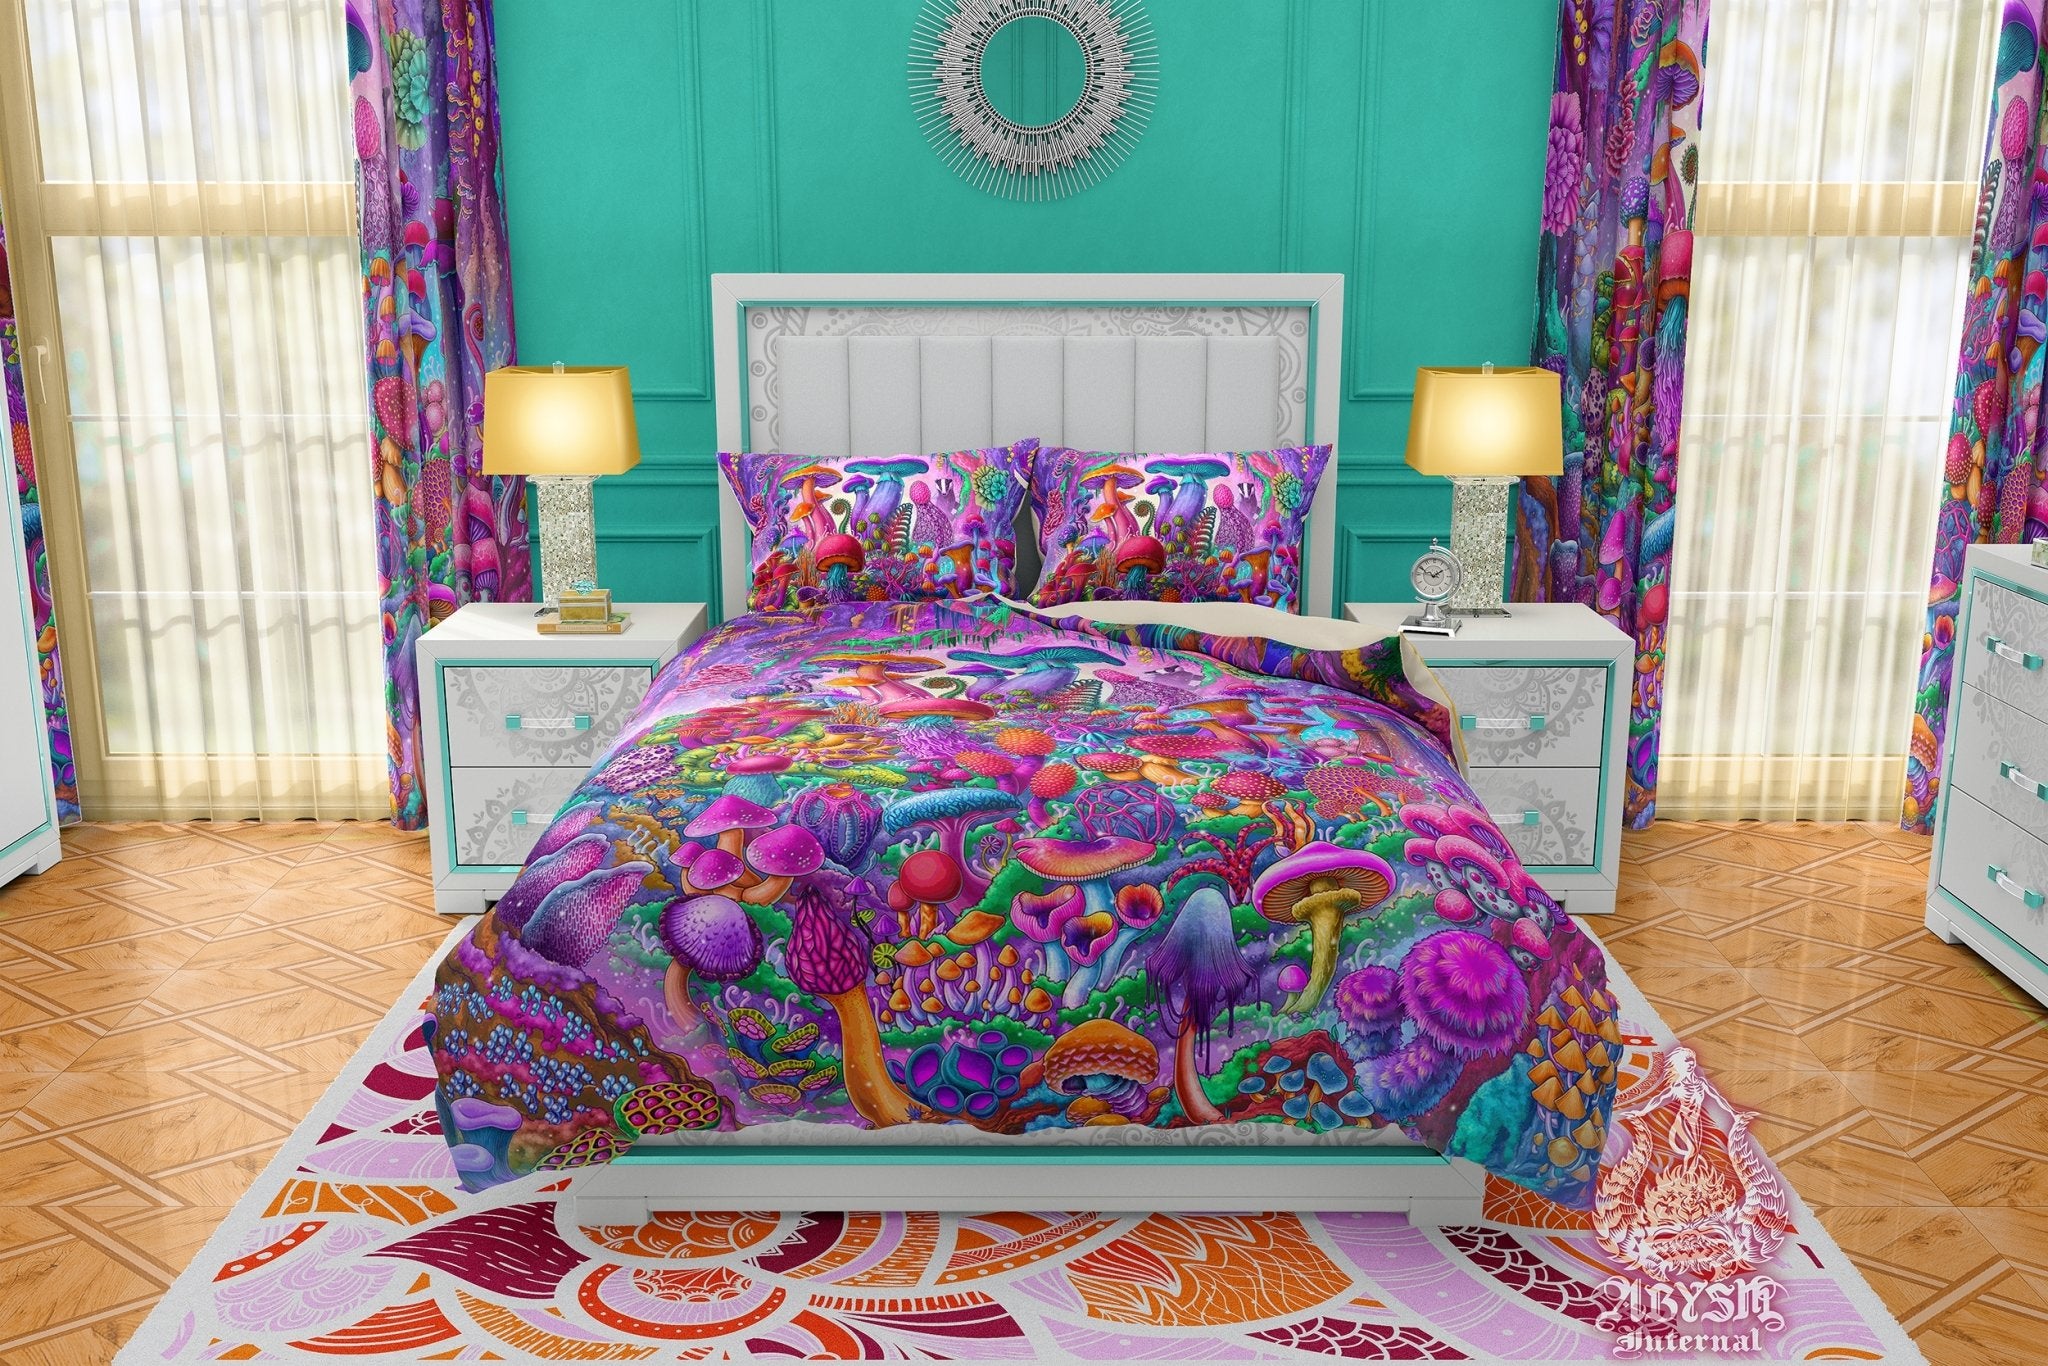 Mushrooms Bedding Set, Comforter and Duvet, Kids and Girls Fantasy Bed Cover, Psychedelic Bedroom Decor, King, Queen and Twin Size - Magic Shrooms, Aesthetic Pastel - Abysm Internal